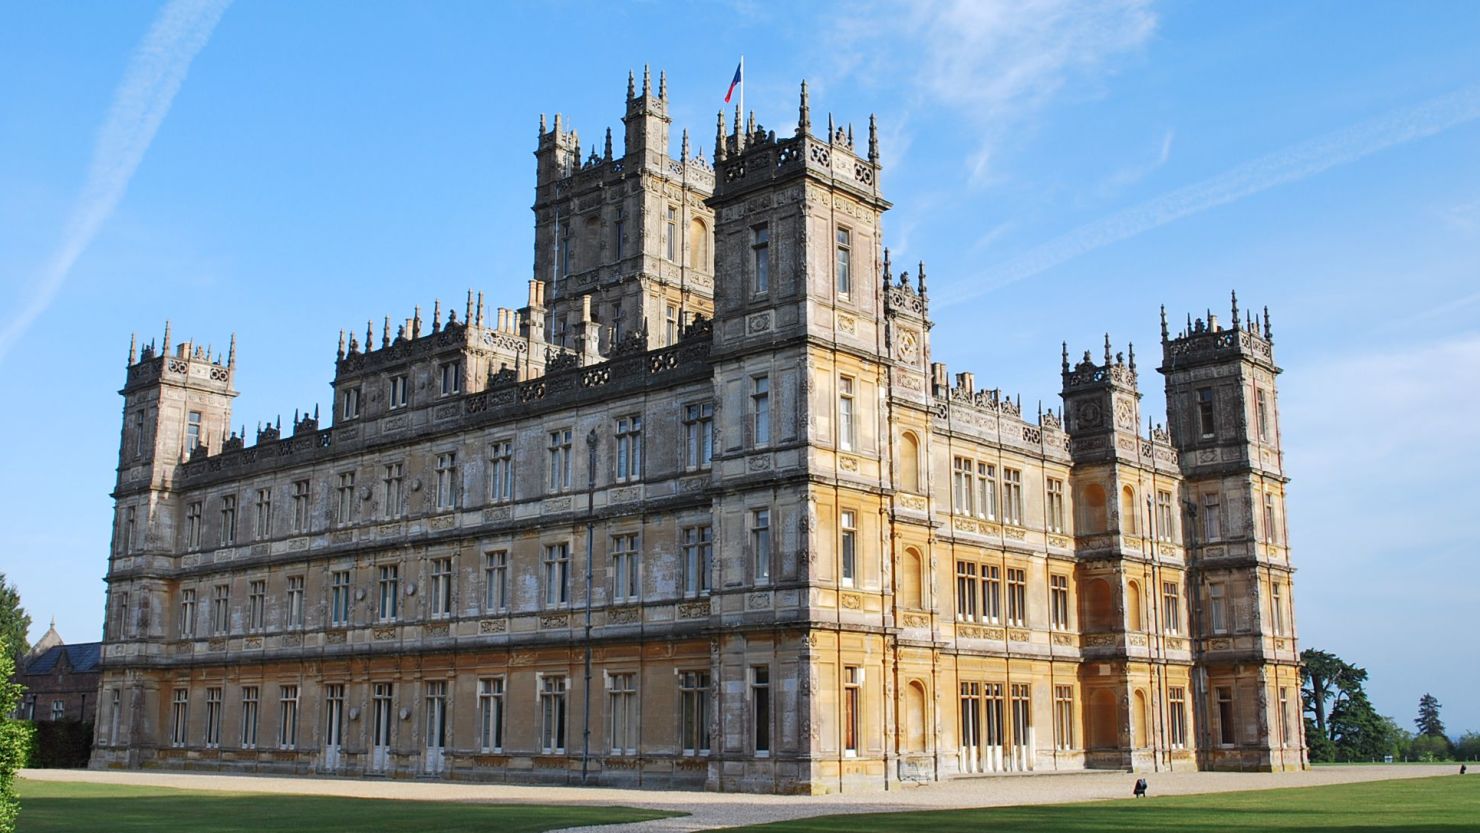 Editorial use only
Mandatory Credit: Photo by ITV/Shutterstock (1526780aq)
Highclere Castle
'Countrywise - Downton Abbey' TV Programme. - Sep 2011
In a one-hour special Countrywise unveils the Real Downton Abbey. The team visits Highclere Castle in Hampshire, the setting for the hit period drama, to reveal its fascinating history and the real life stories both upstairs and downstairs. As well as people, Countrywise takes a look at the magnificent landscape, and unearths the link between Highclere and the world's most famous Egyptian pharaoh.